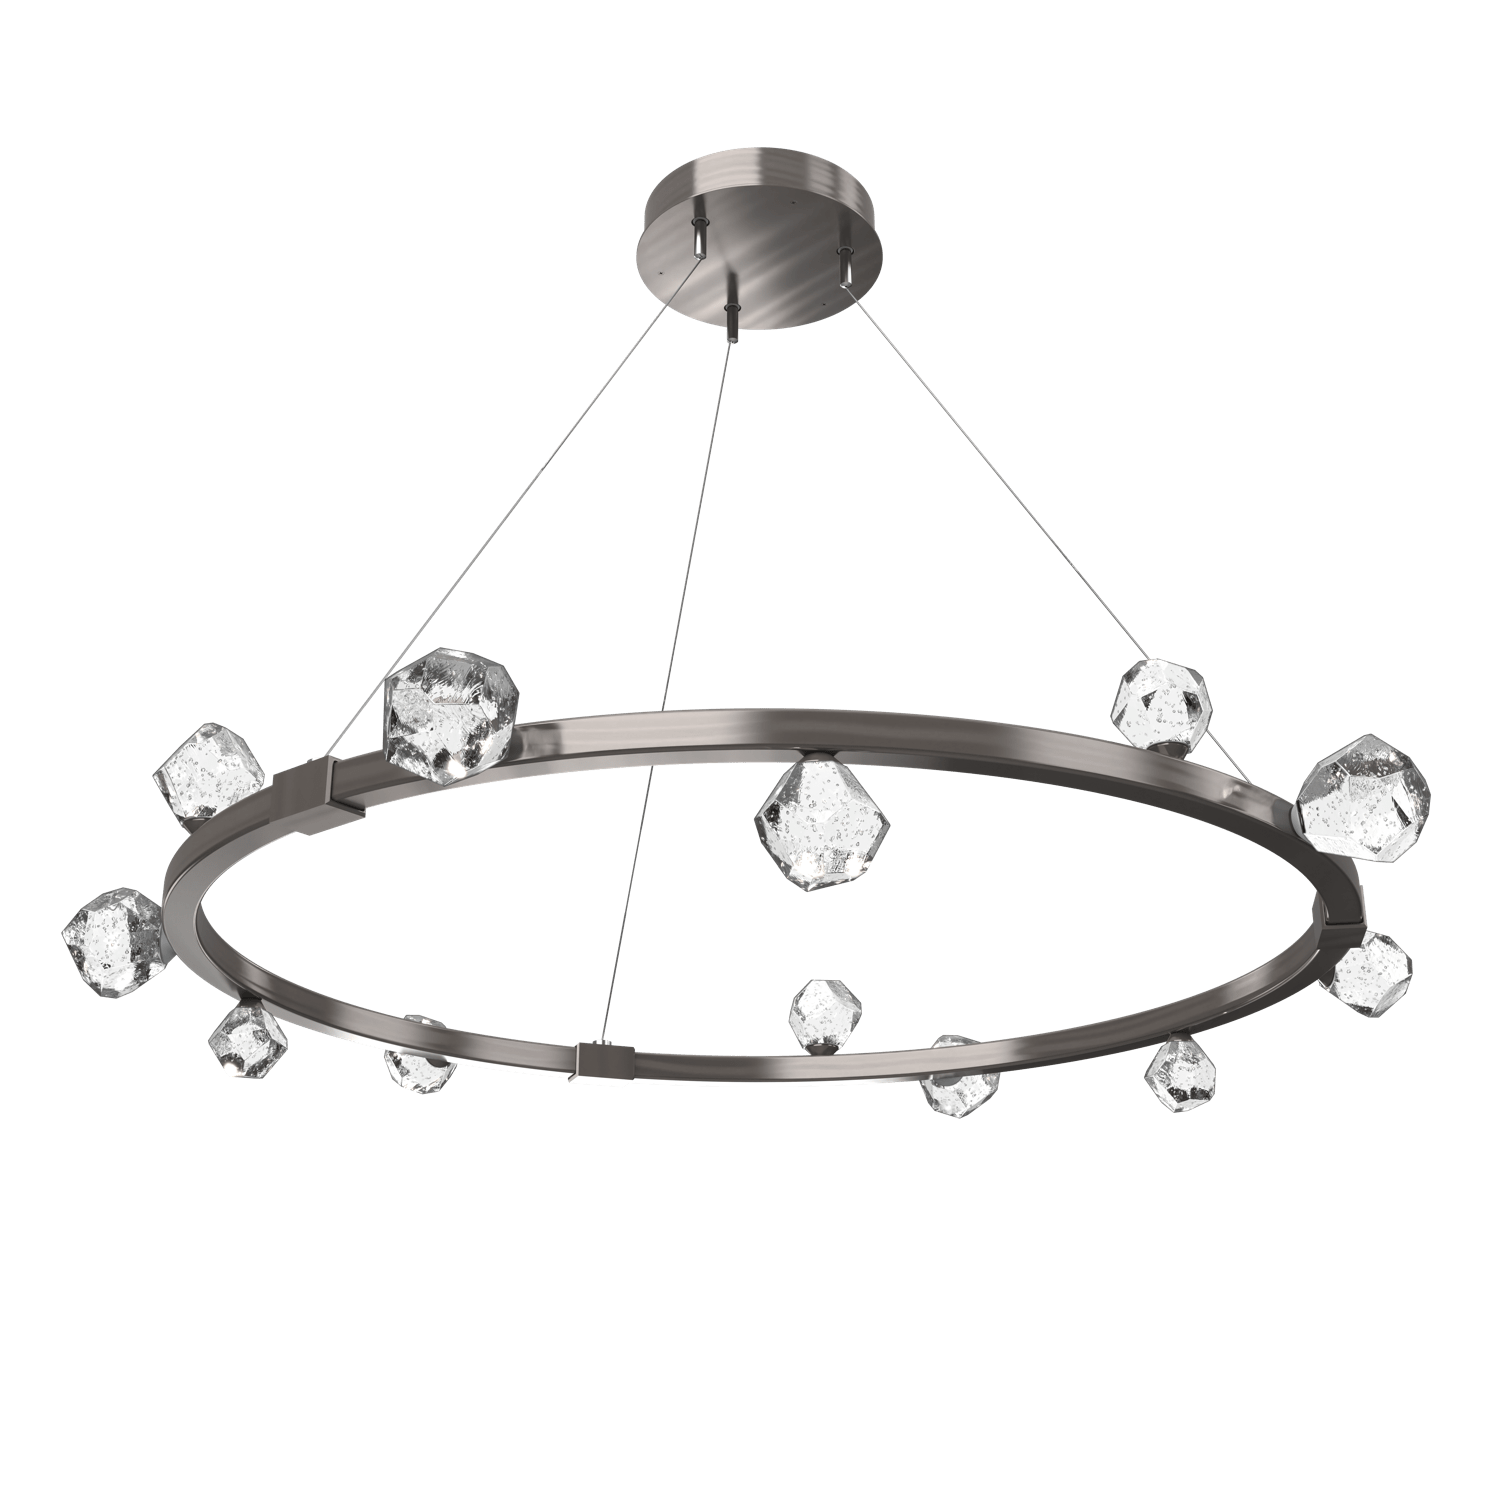 CHB0070-40-GM-Hammerton-Studio-Stella-40-inch-radial-ring-chandelier-with-gunmetal-finish-and-clear-cast-glass-shades-and-LED-lamping